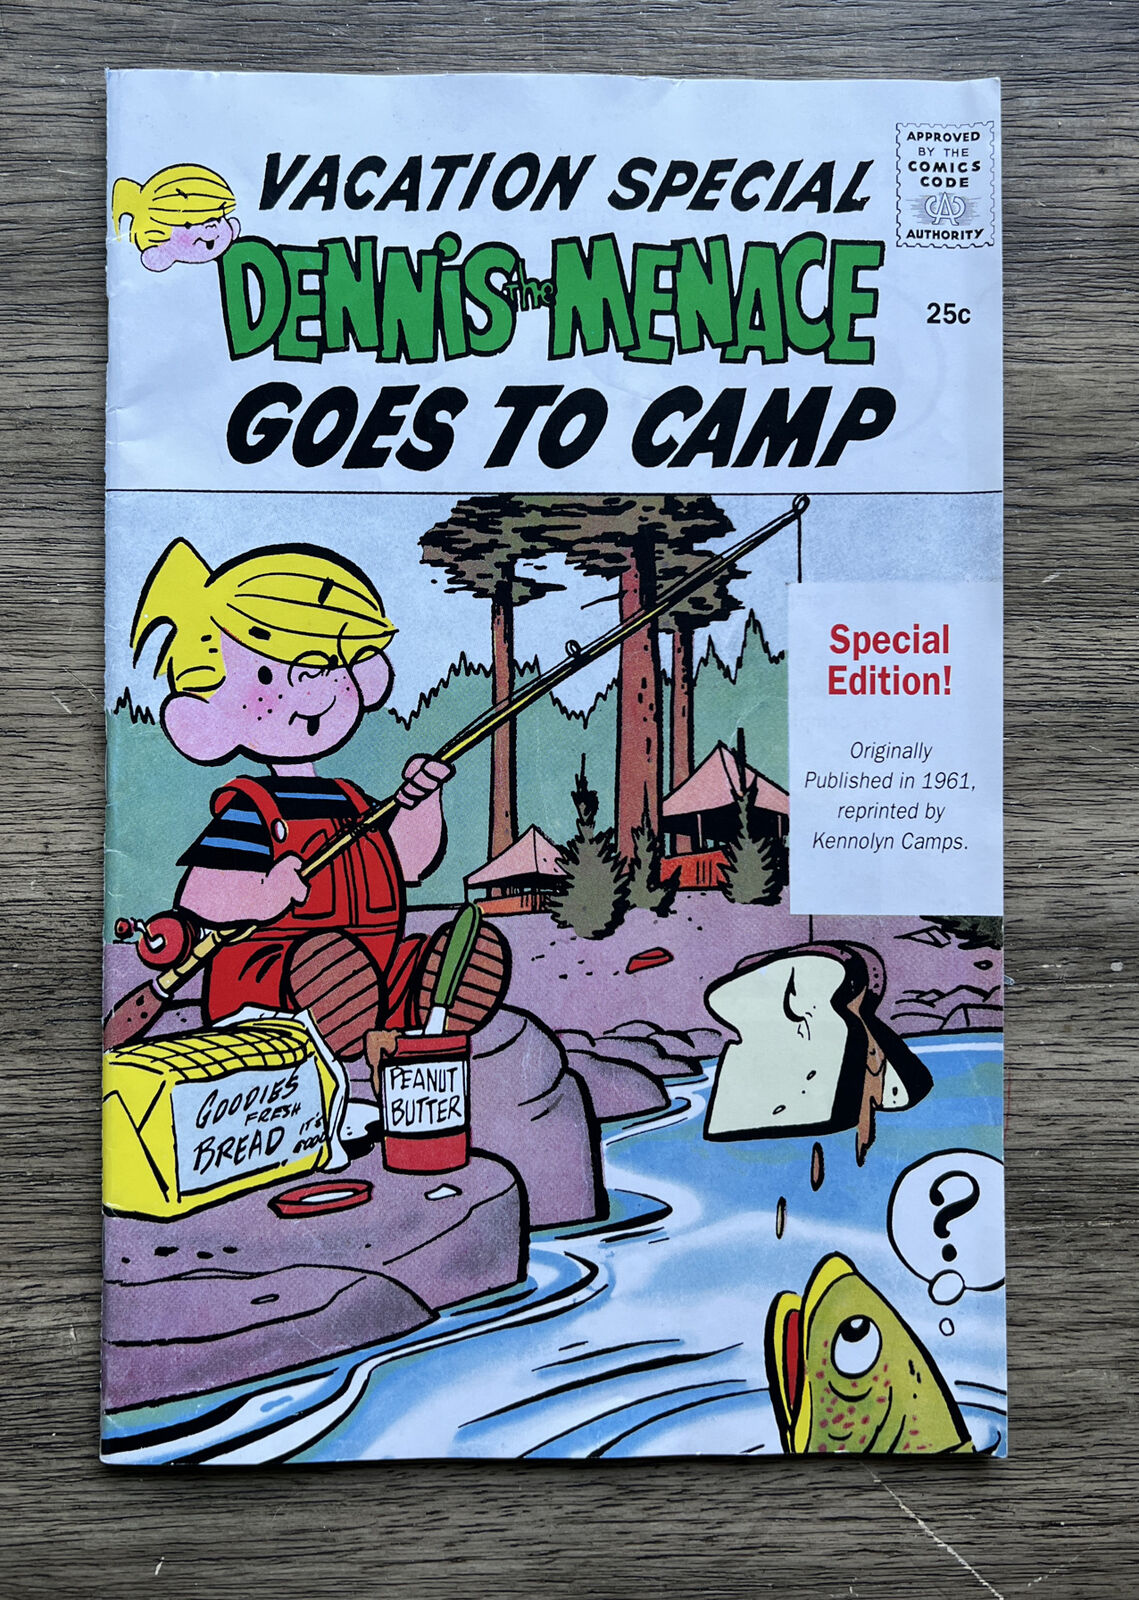 Dennis the Menace - Dennis goes to camp - 1961 - Special Edition